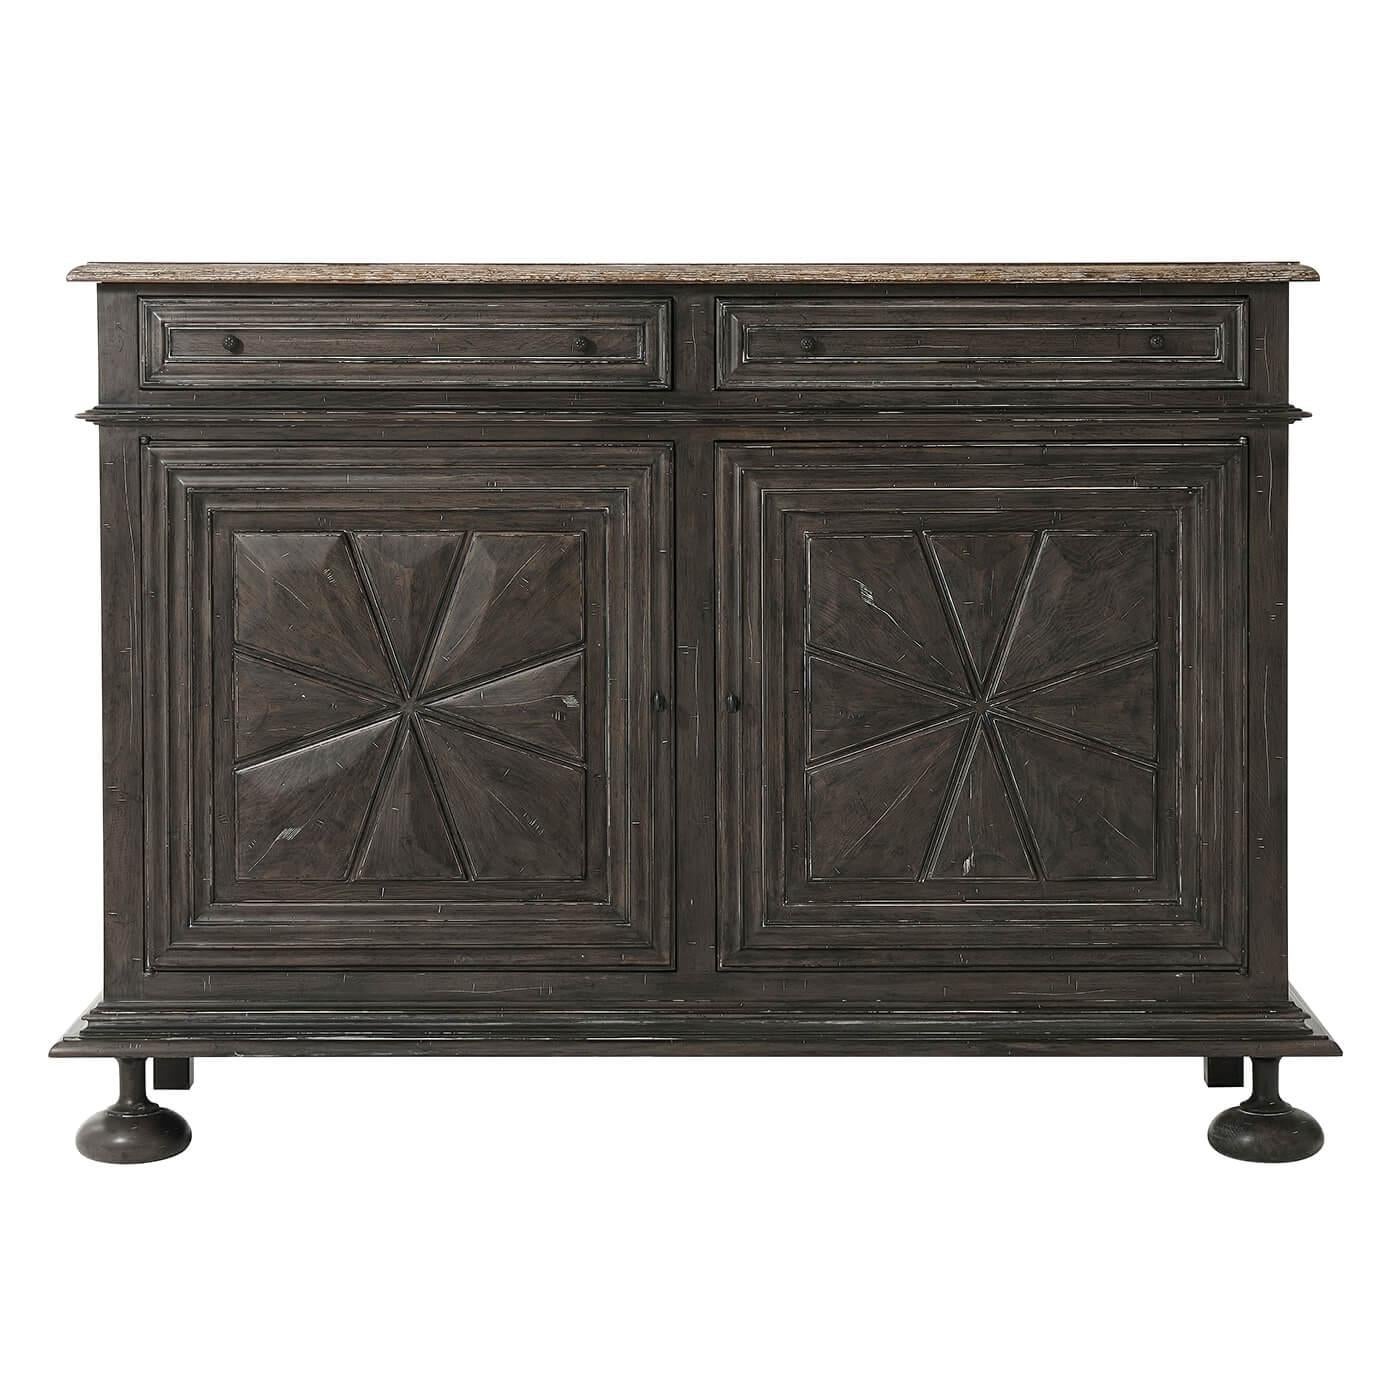 Antique French style oak veneered cabinet with a carmel finish, two frieze drawers above a cabinet with two stellar relief doors, an interior with two sections each with adjustable shelves and raised on bun feet.
Dimensions: 62.5